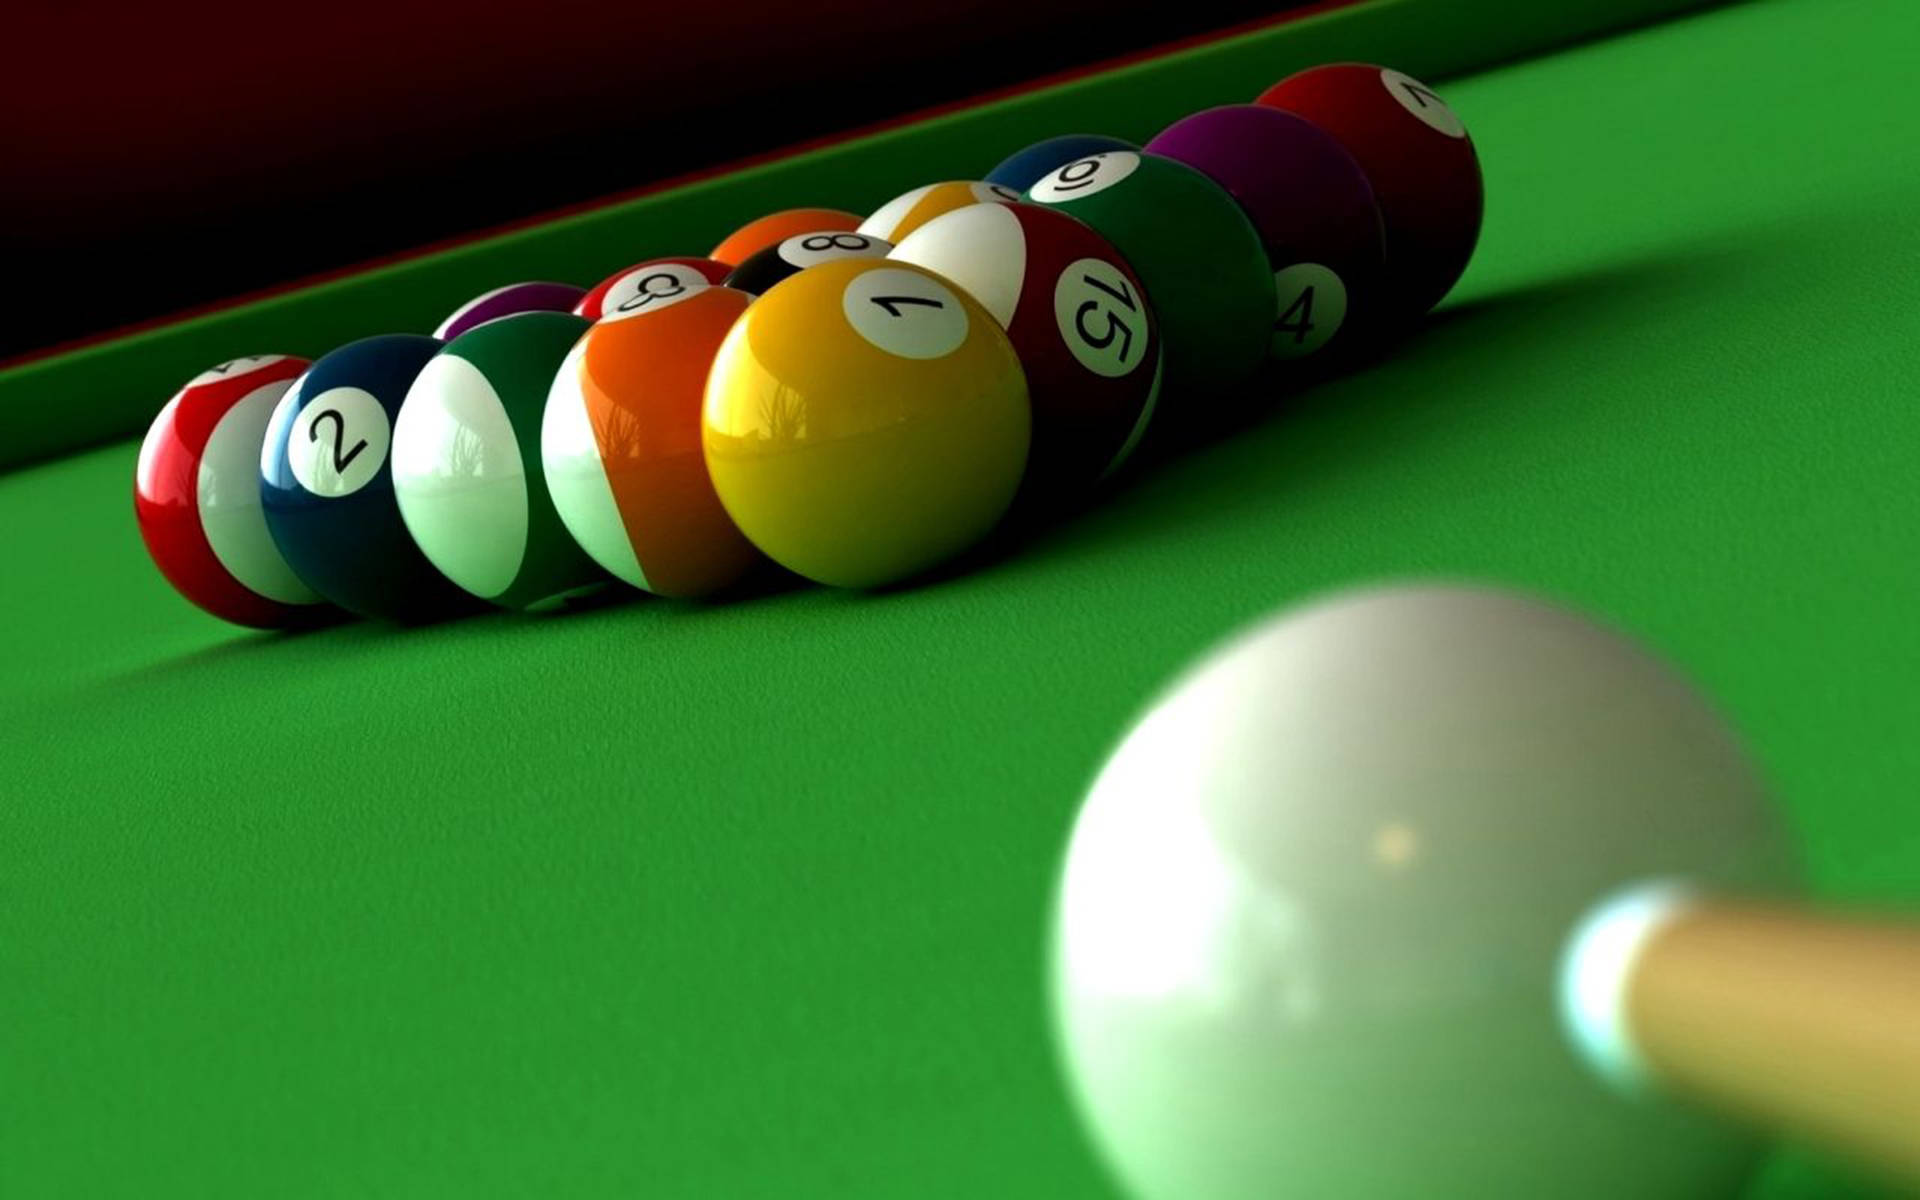 Perfect Precision - A Masterful Snooker Shot